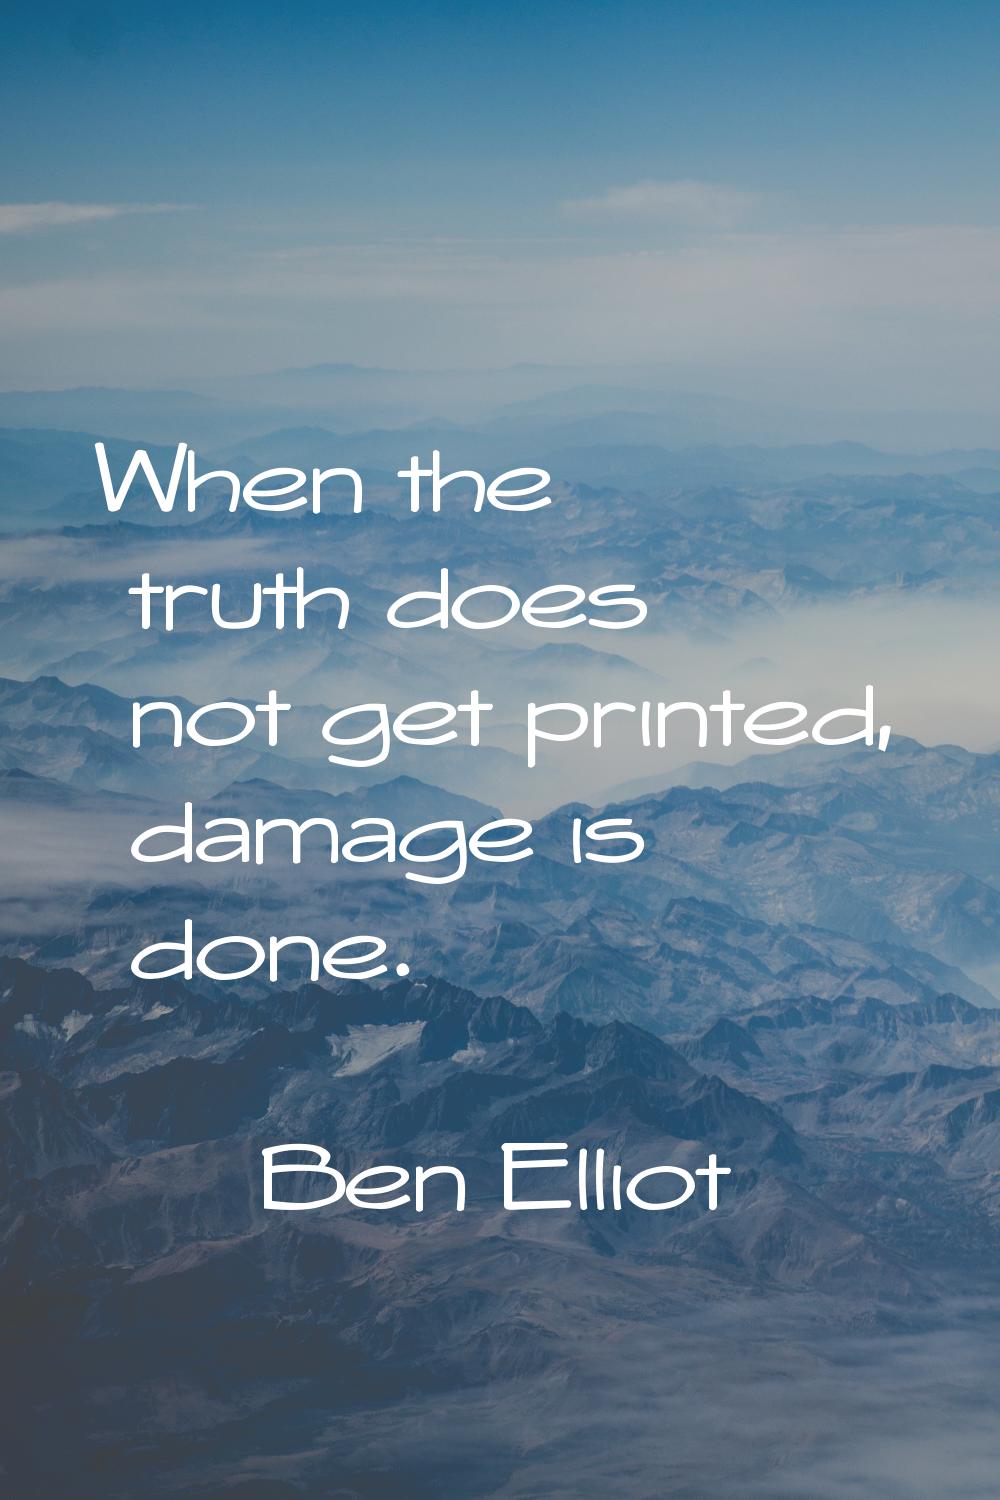 When the truth does not get printed, damage is done.